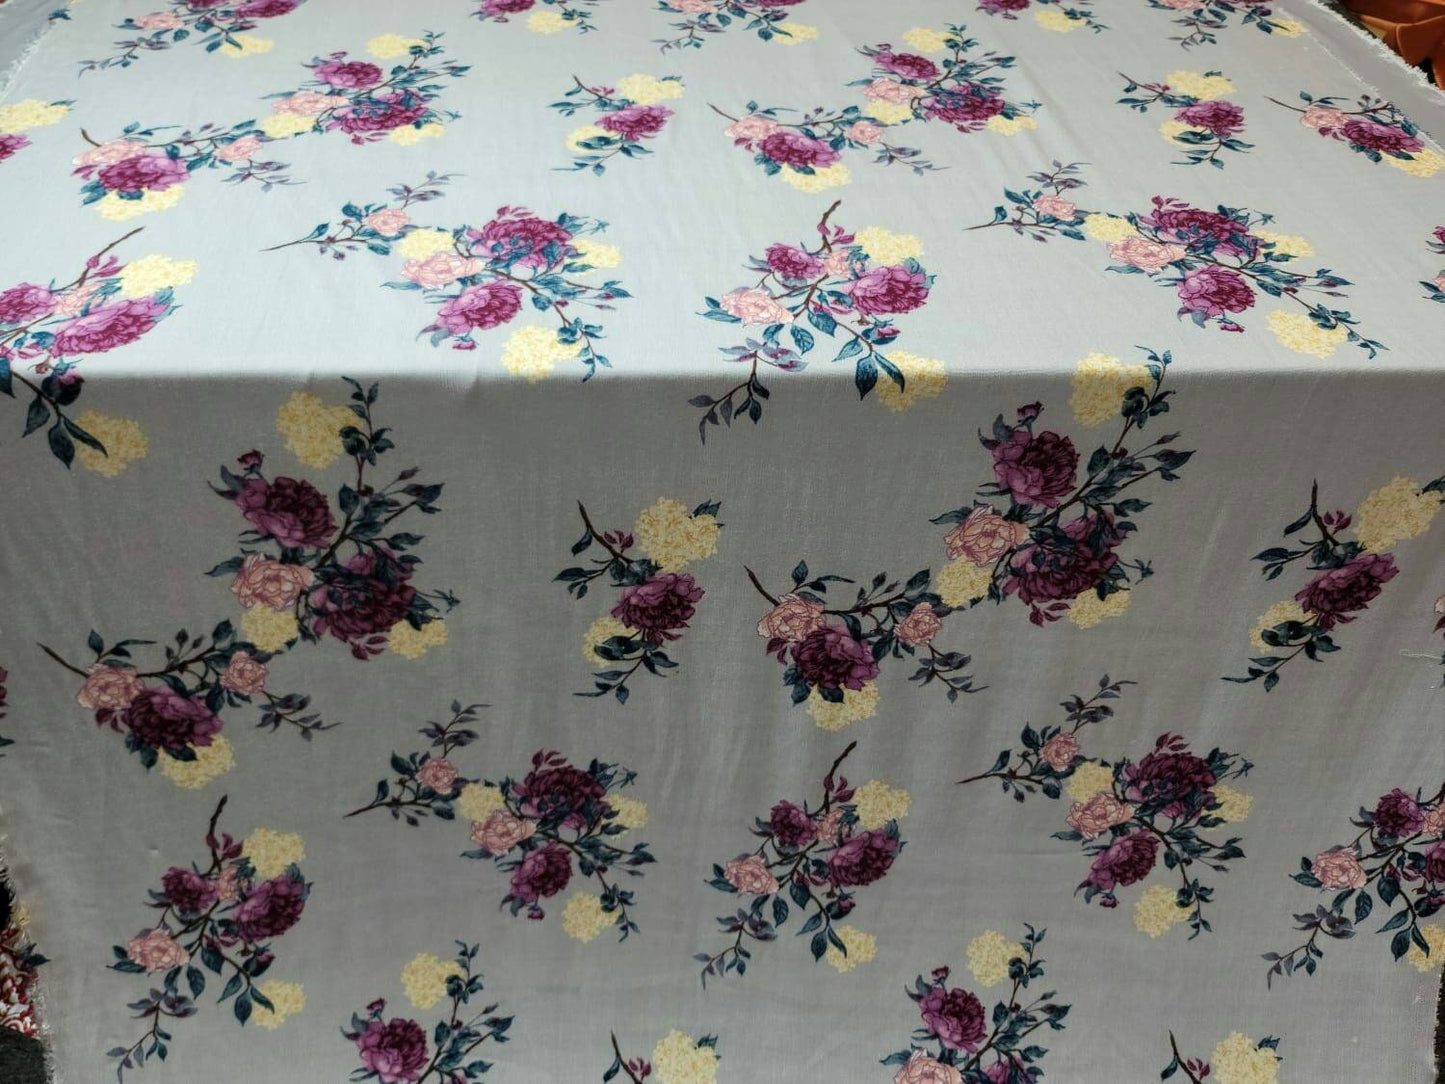 Rayon Challis Fabric By The Yard Ligth Gray Background Pinkish Floral Flowers Multicolor Dress Clothing Fabric By The Yard